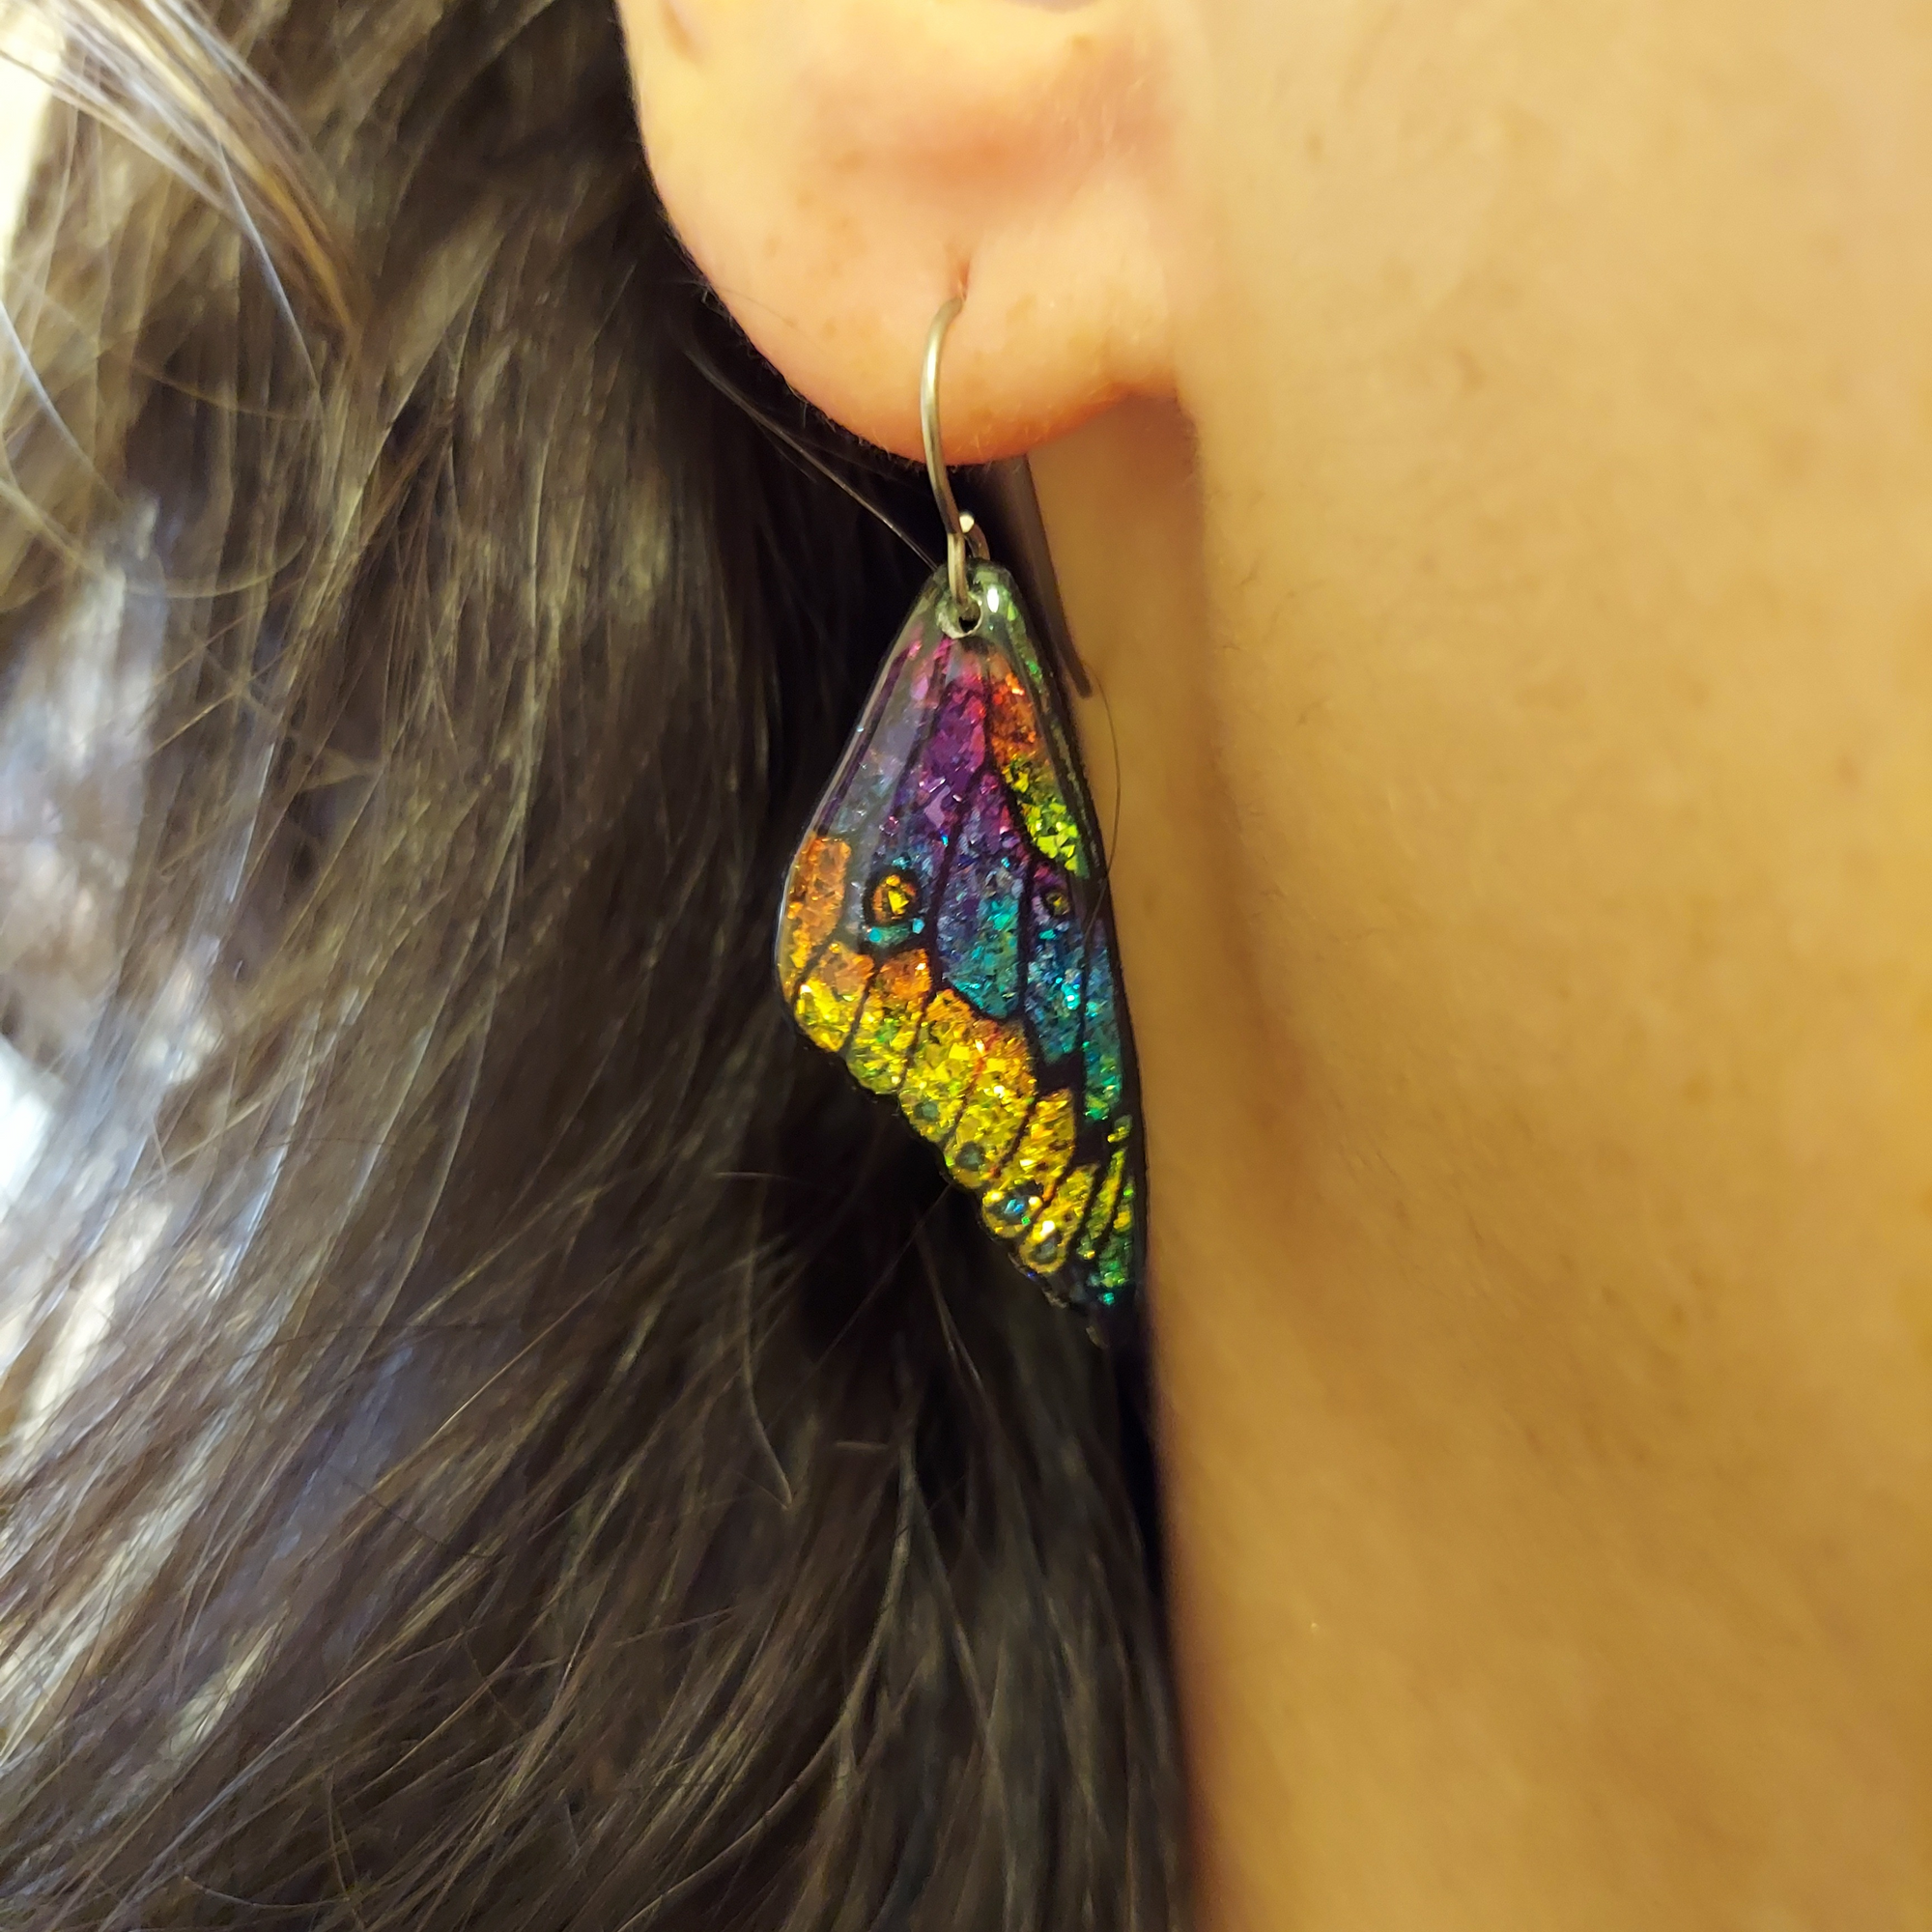 #24 (3) Small Blue-Yellow Sparkly Butterfly Wing Earrings